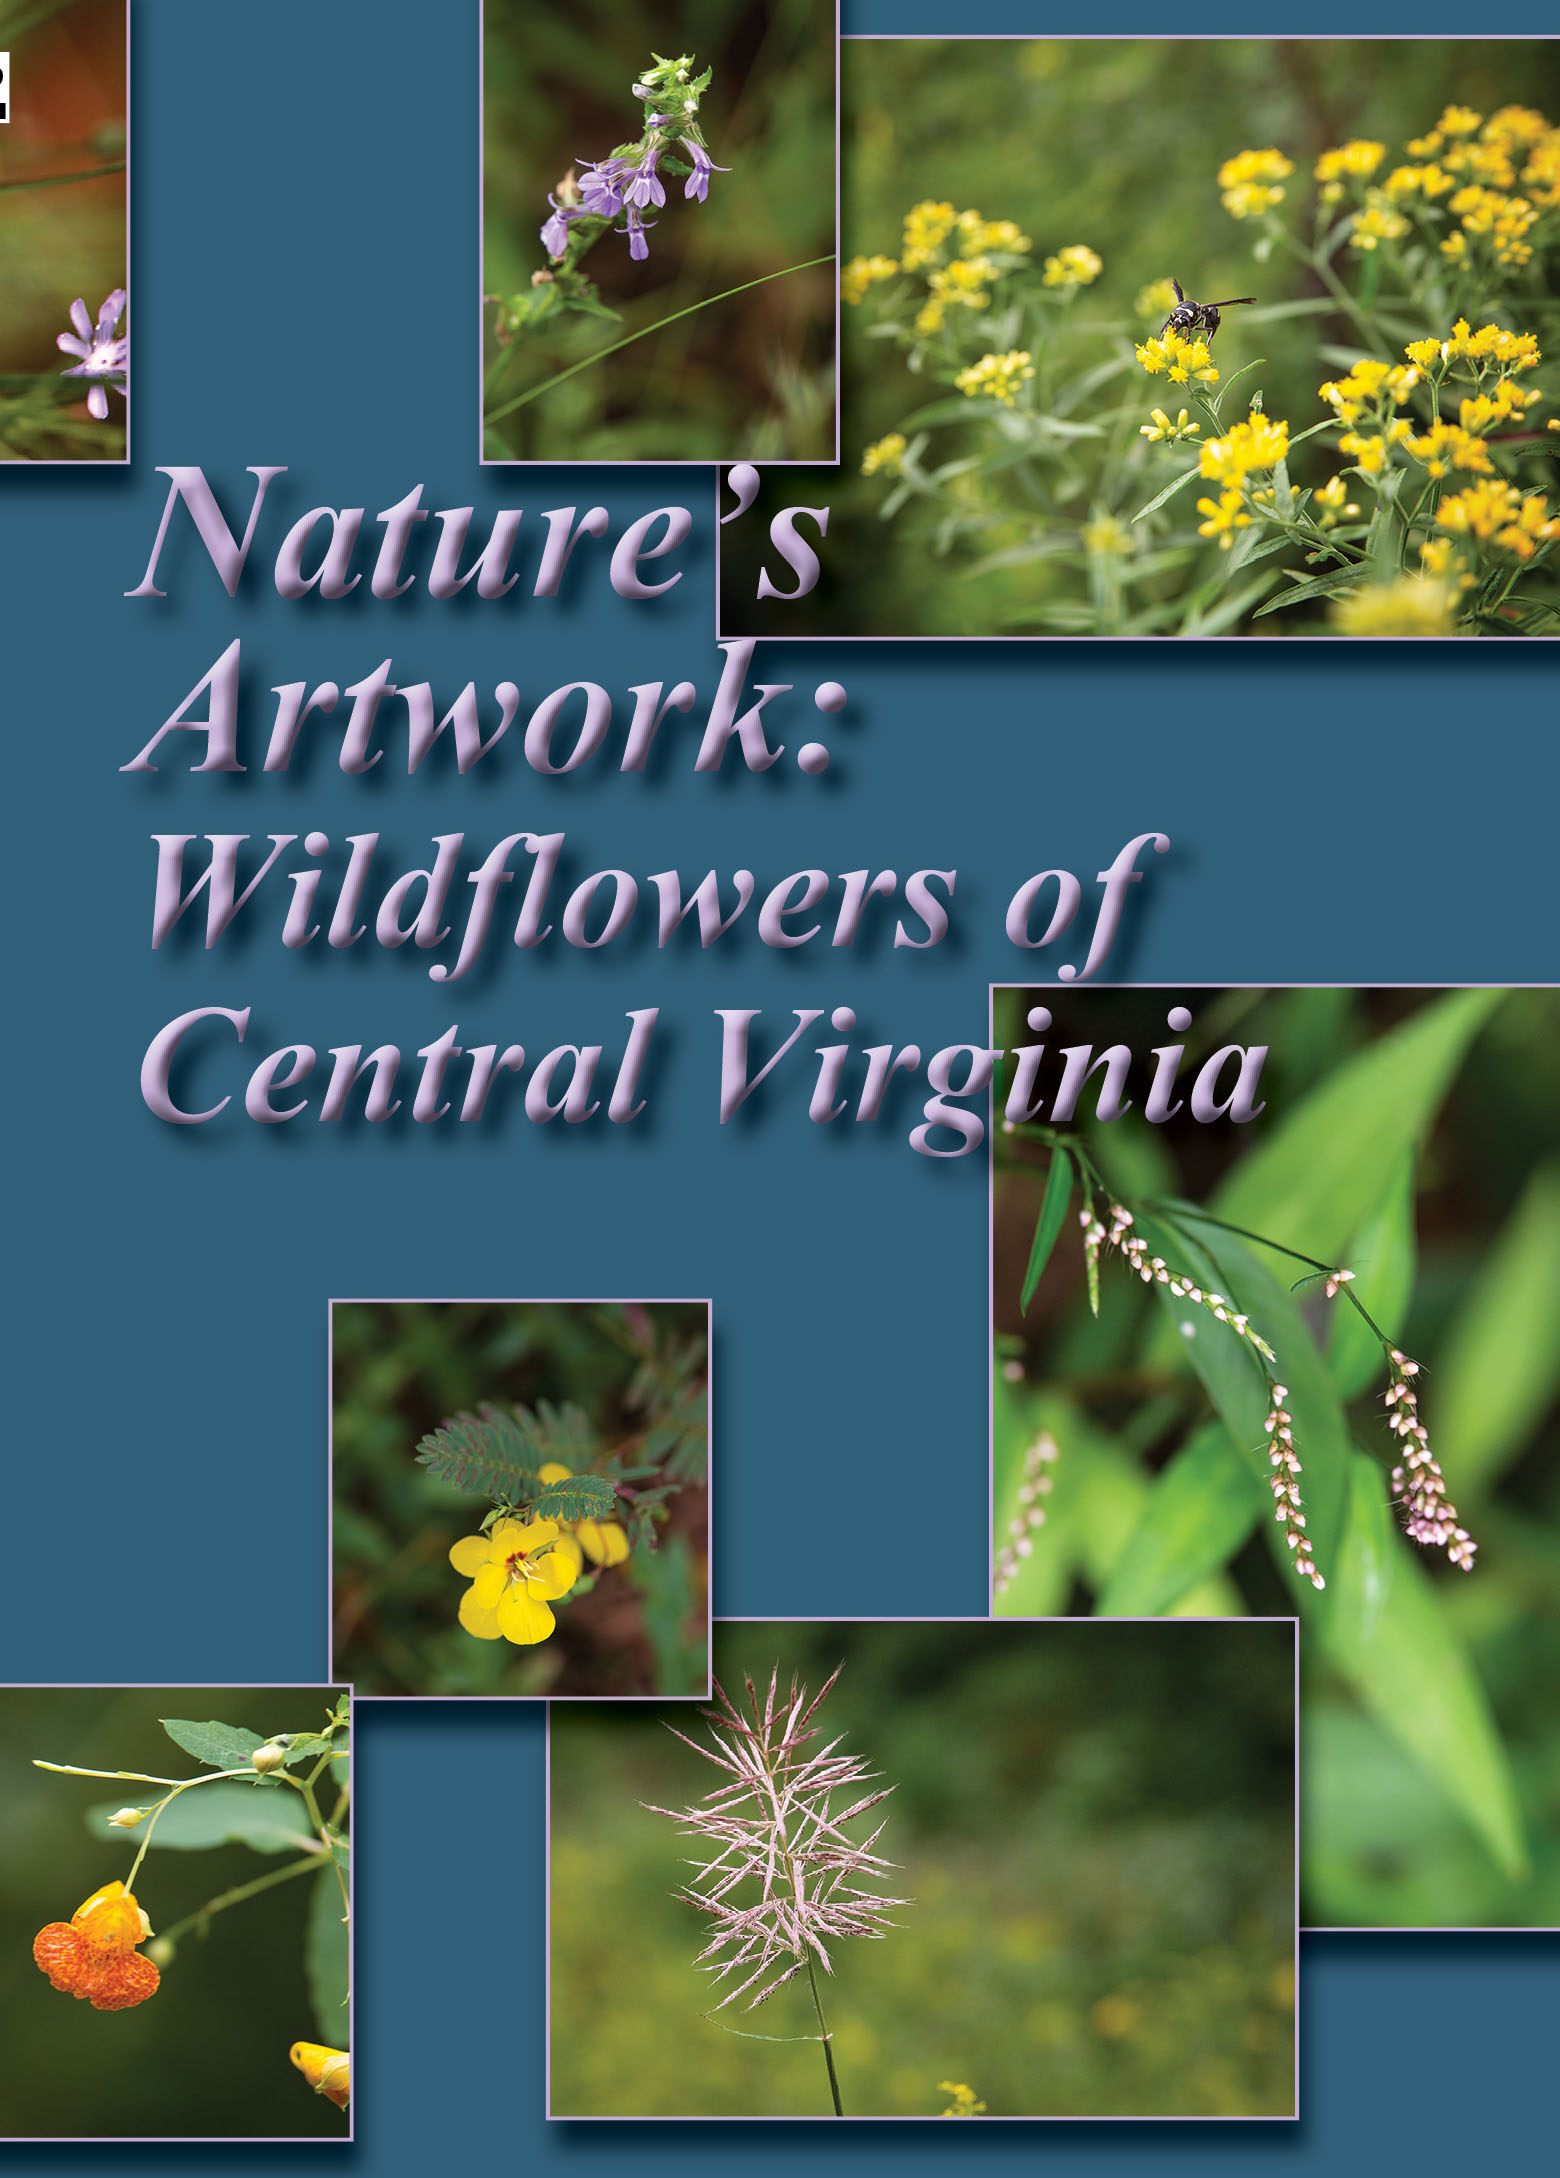 Natures_Artwork-Wildflowers_DVD_Cover